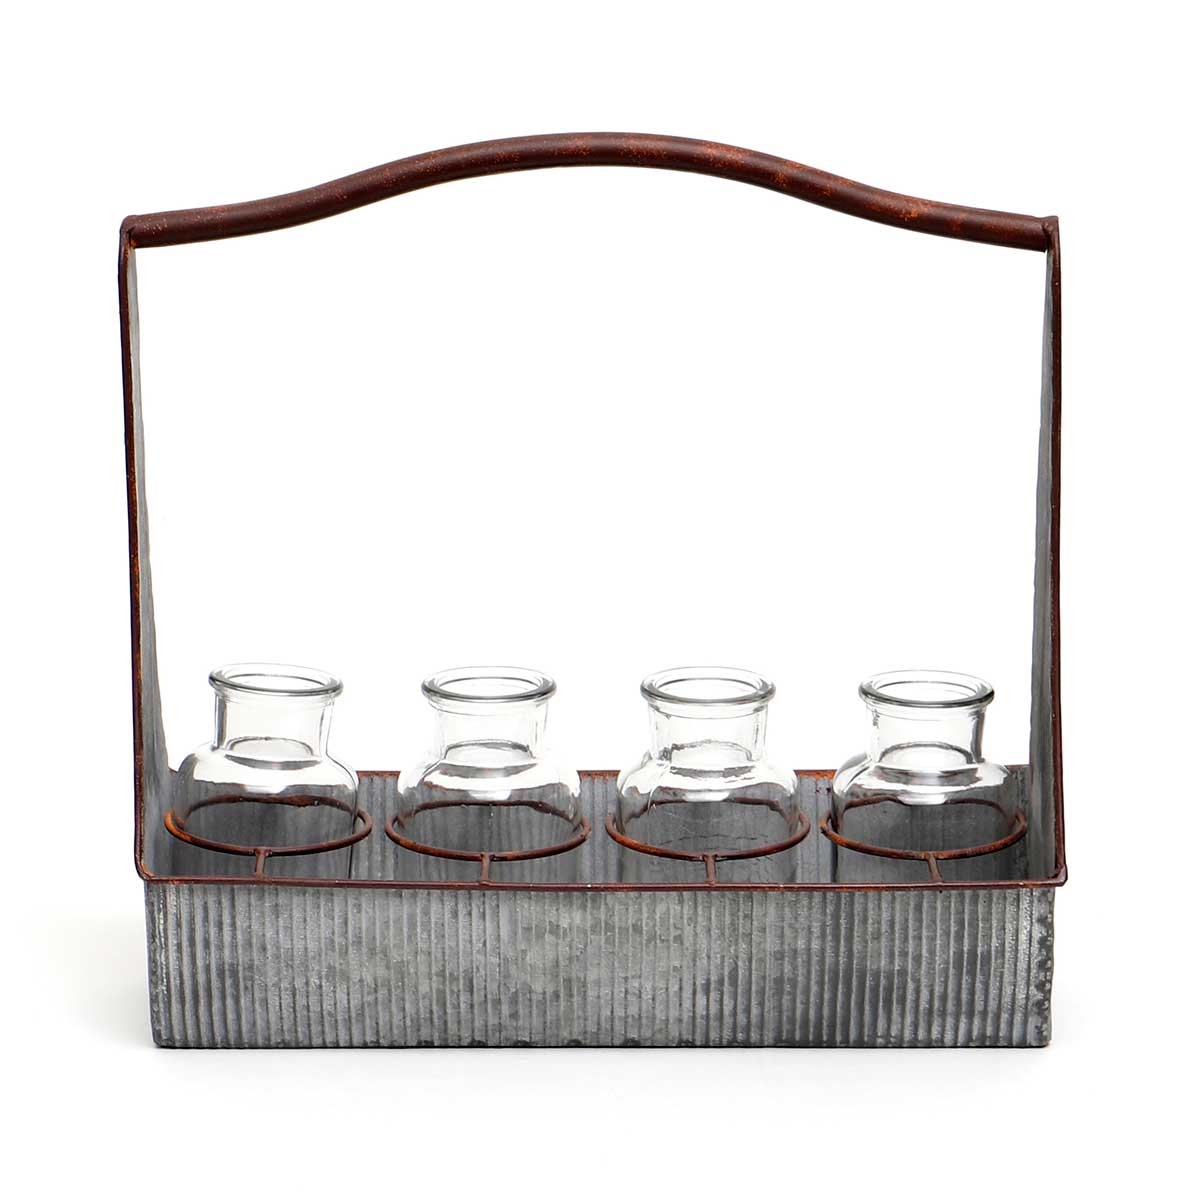 !METAL ANTIQUE CARPENTER TRAY WITH 4 GLASS BOTTLES